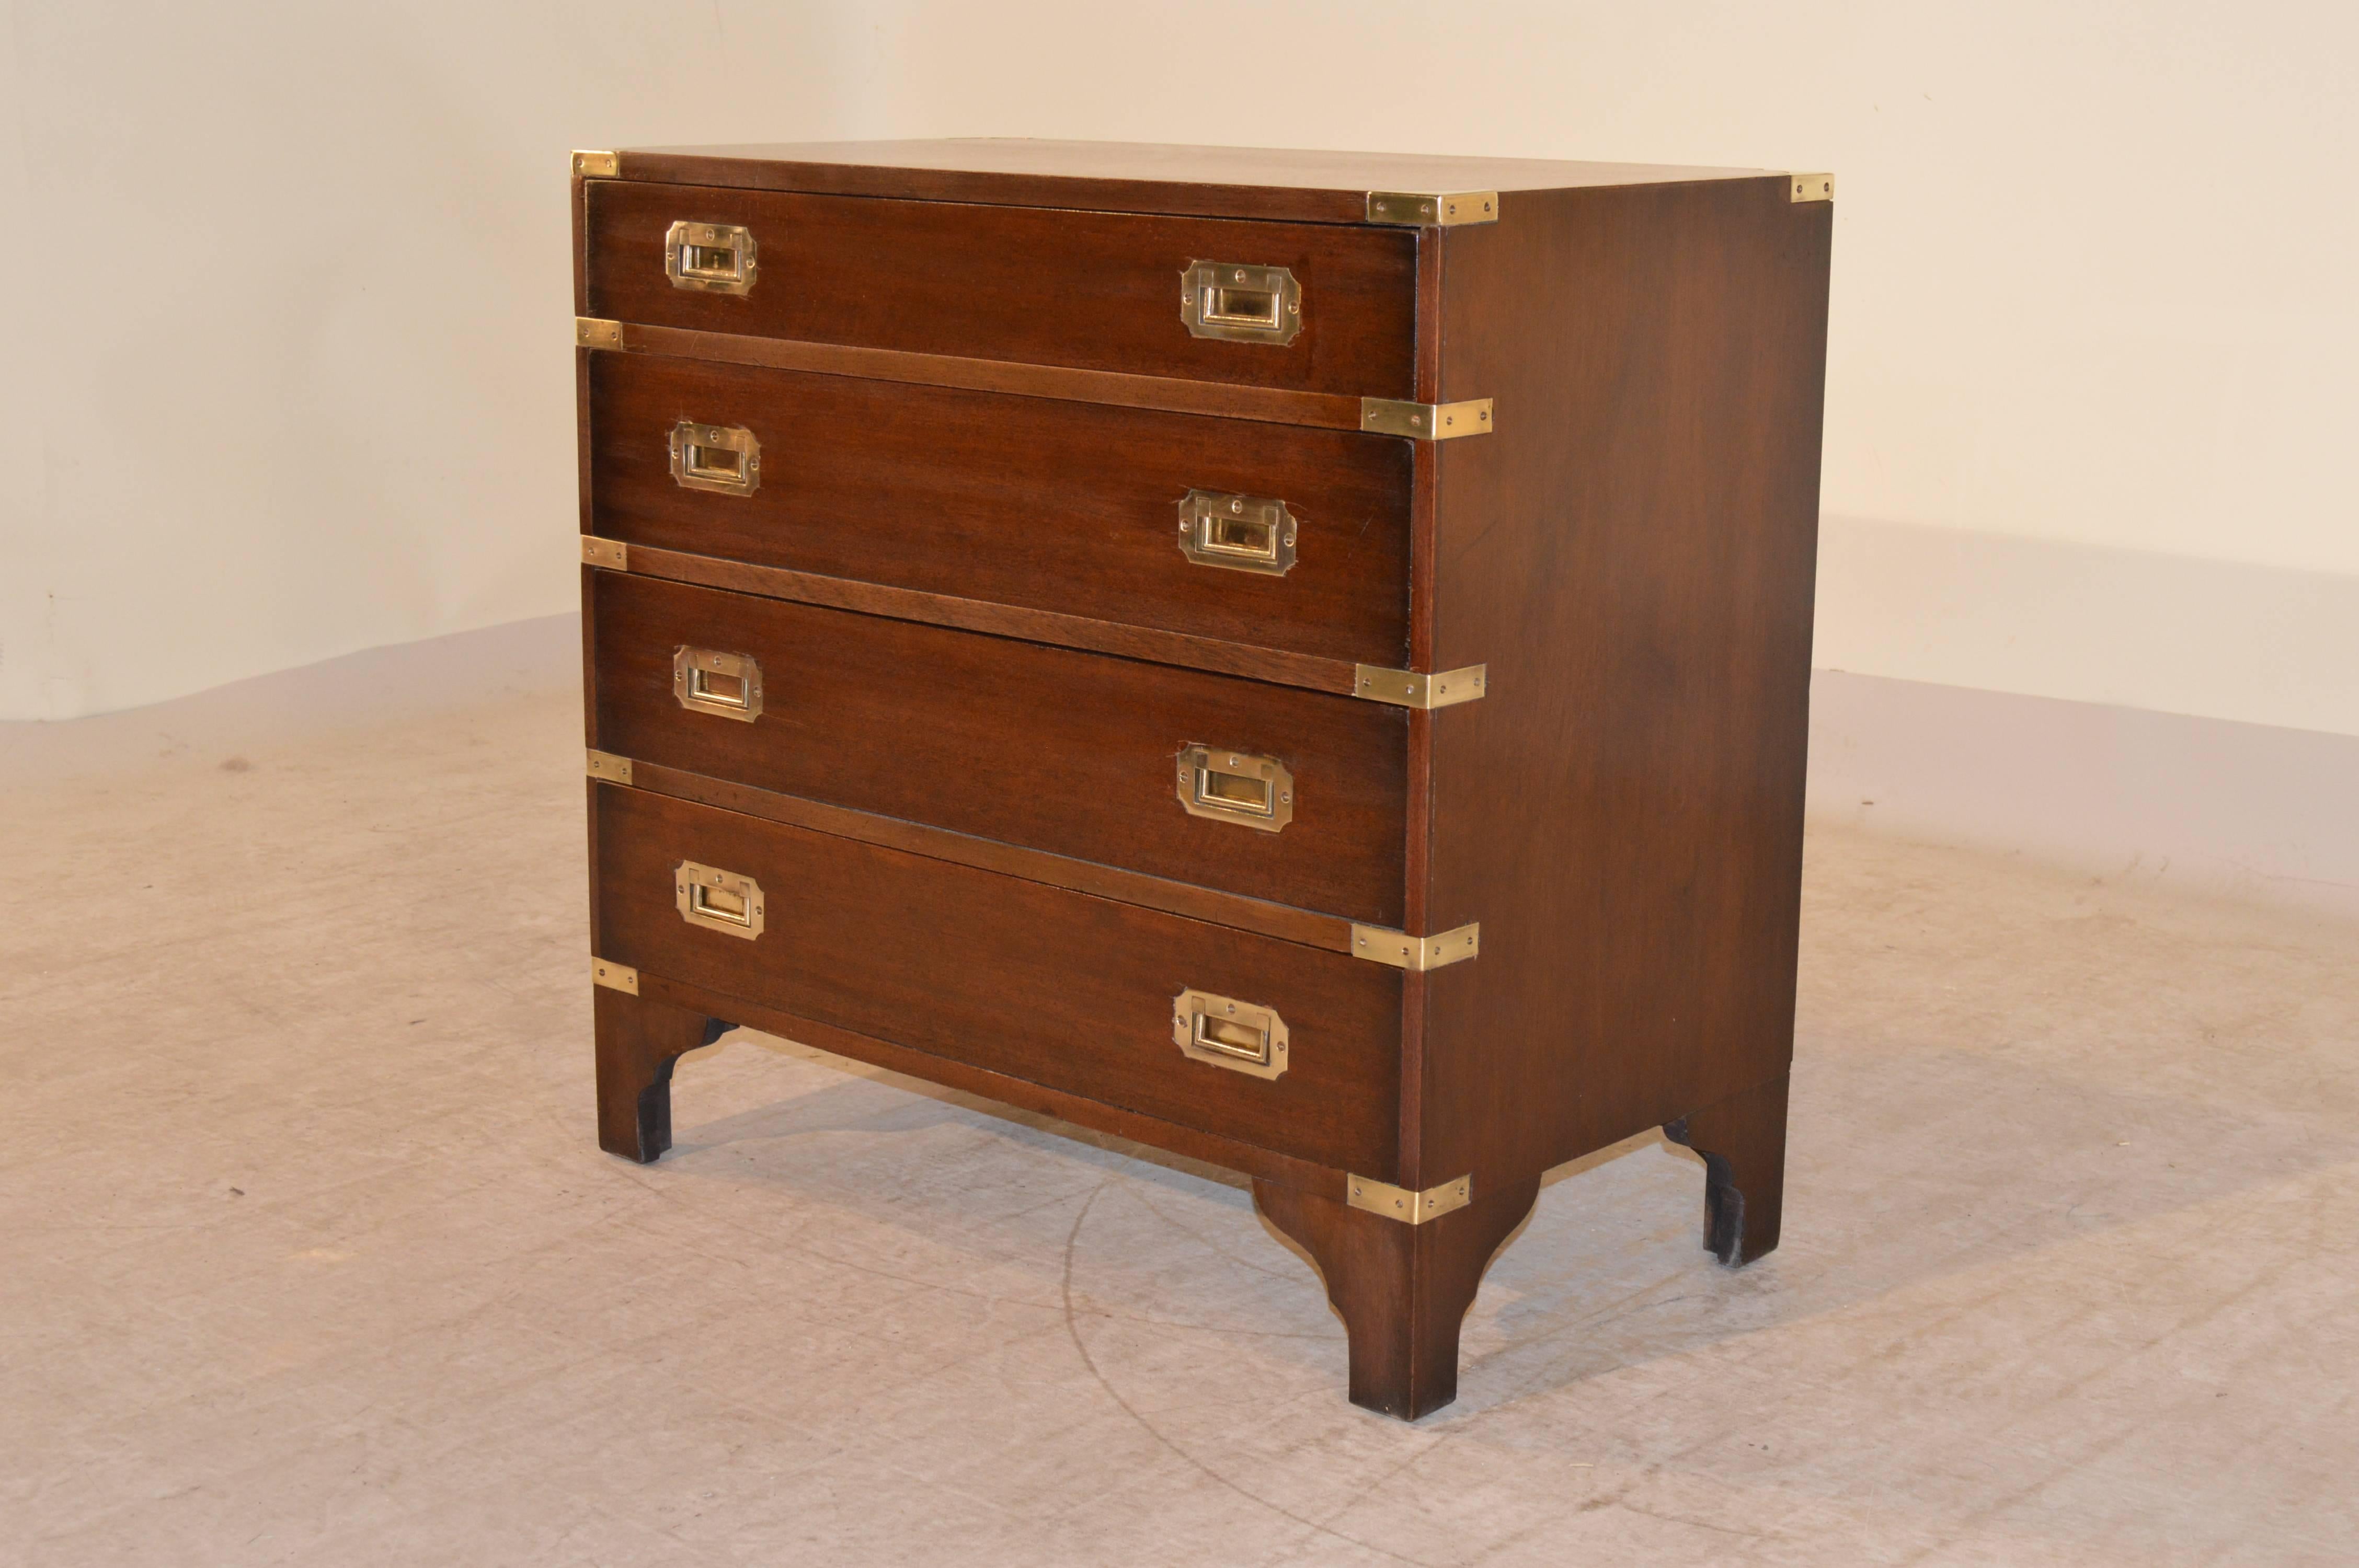 English Campaign style chest made from mahogany with brass accents and hardware. It has four drawers and is raised on bracket feet, circa 1950.